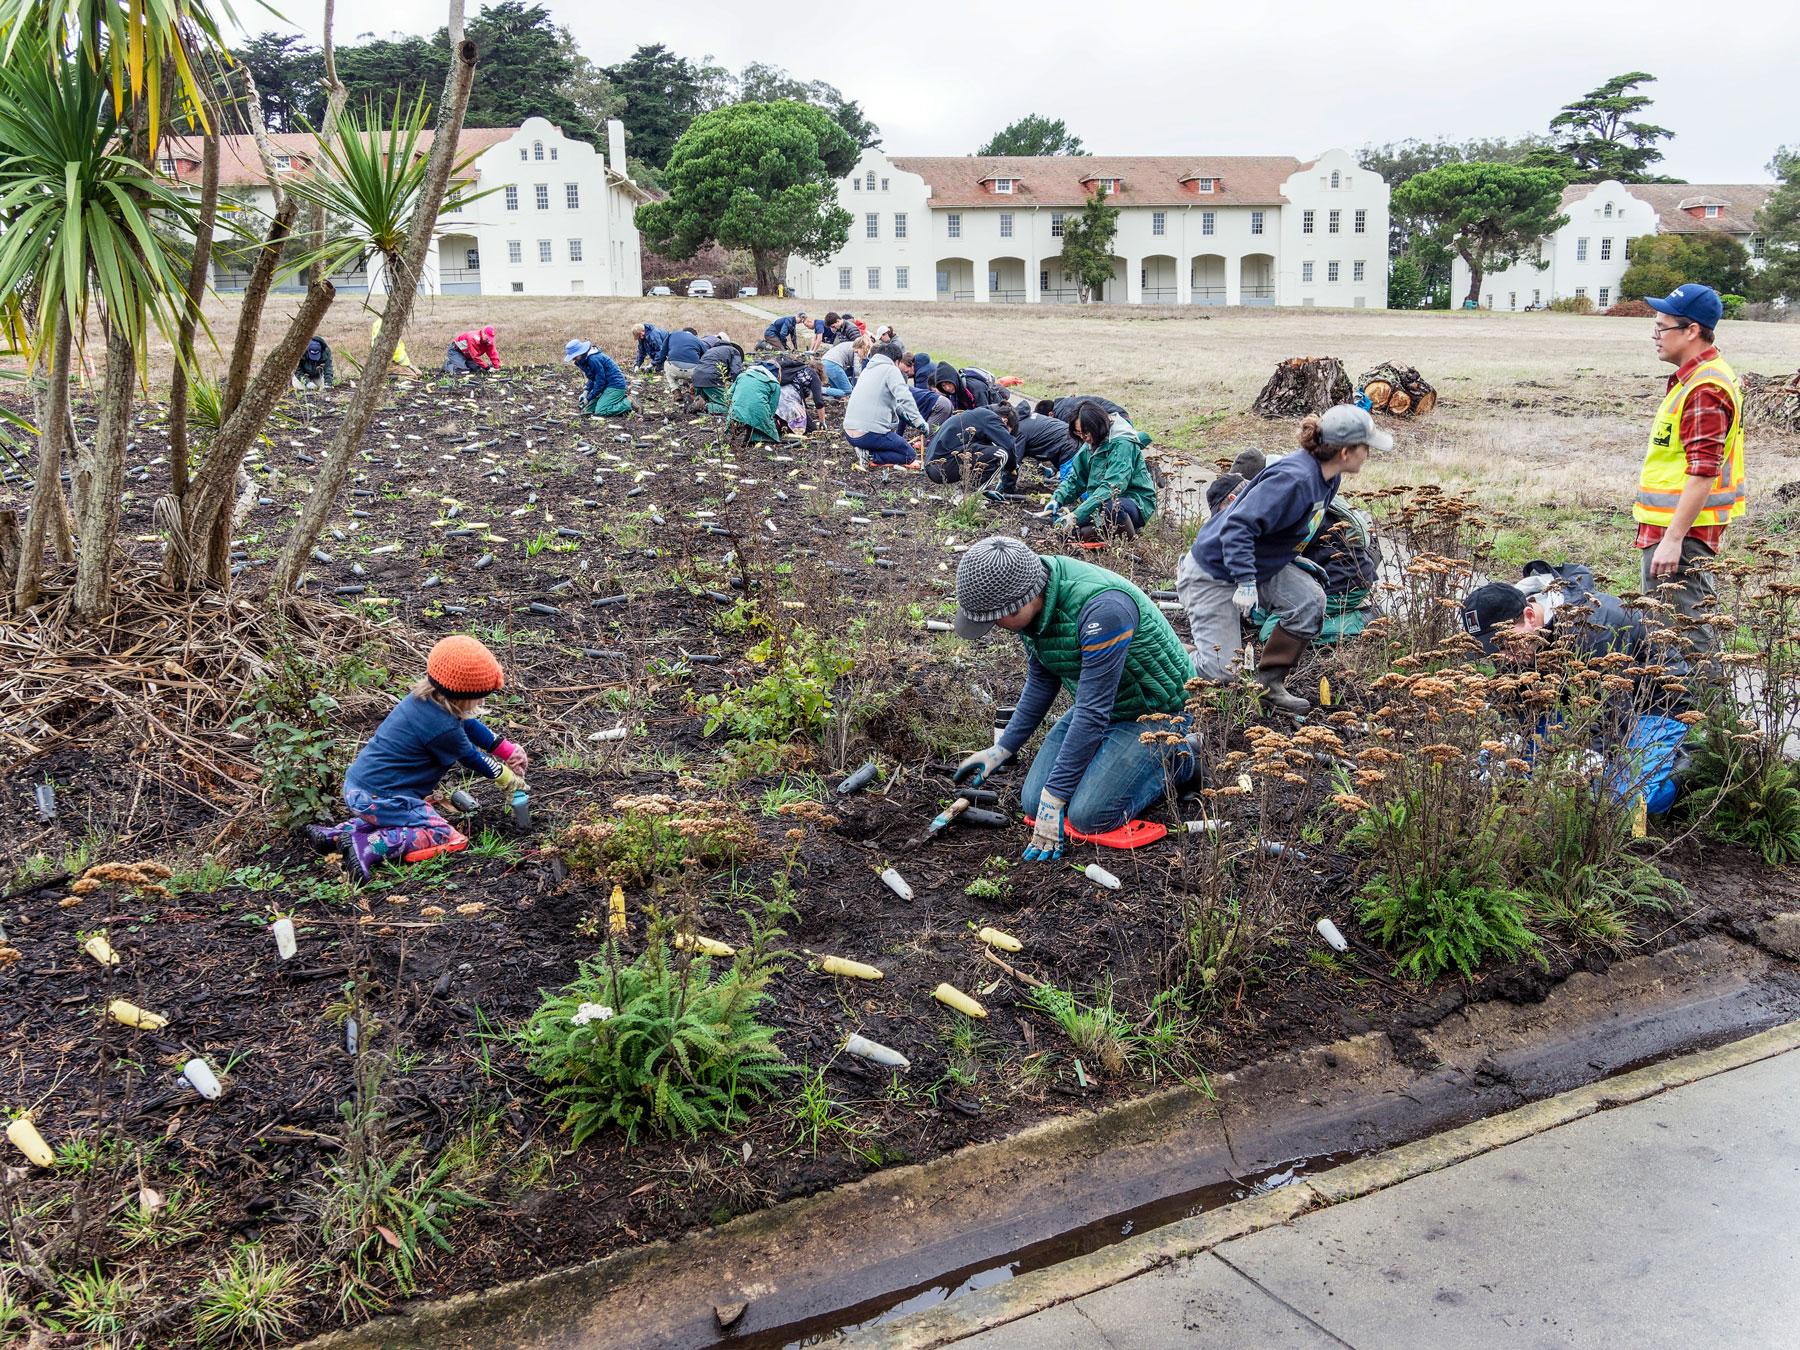 Volunteers plant native plants at the Fort Scott parade ground in the Presidio.